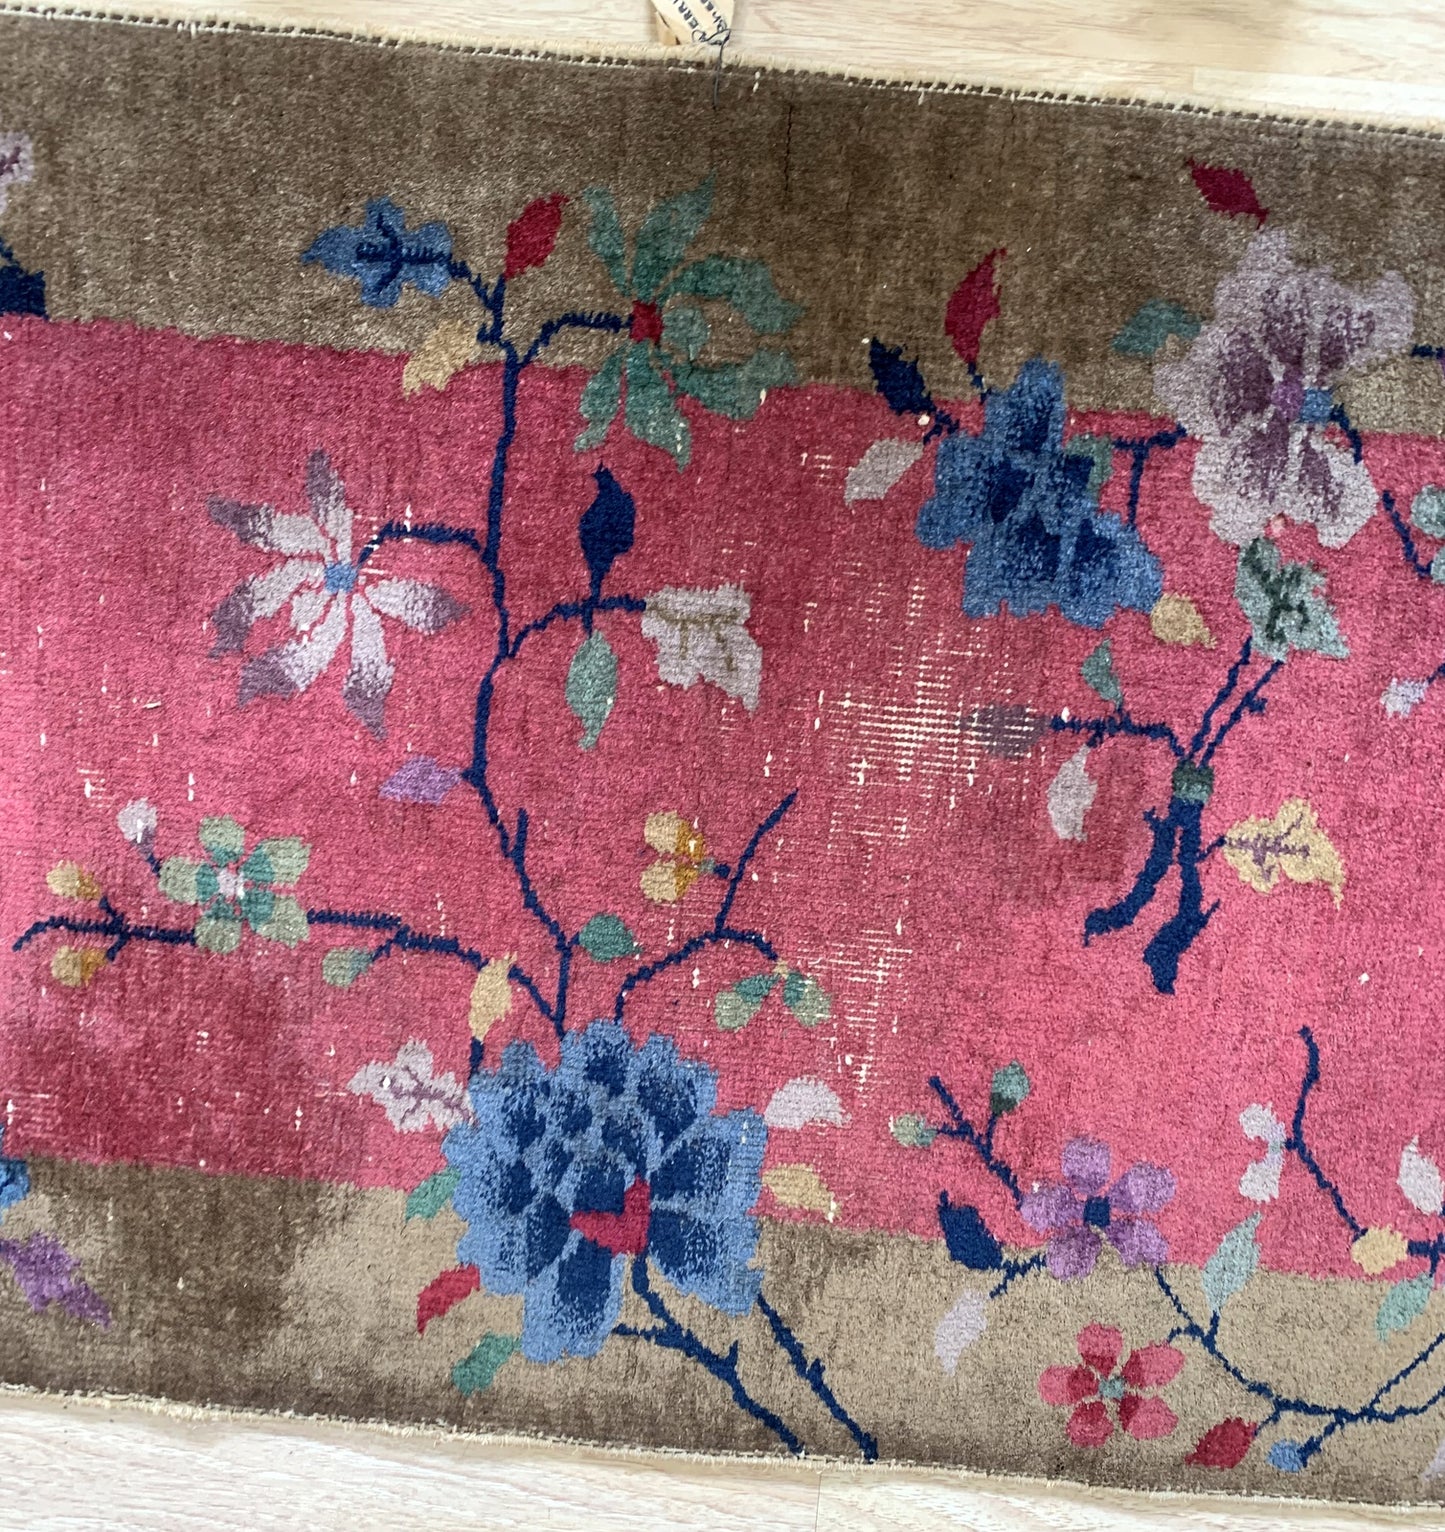 Close-up of historic rug showcasing the intricate Chinese weaving techniques and vibrant color palette.